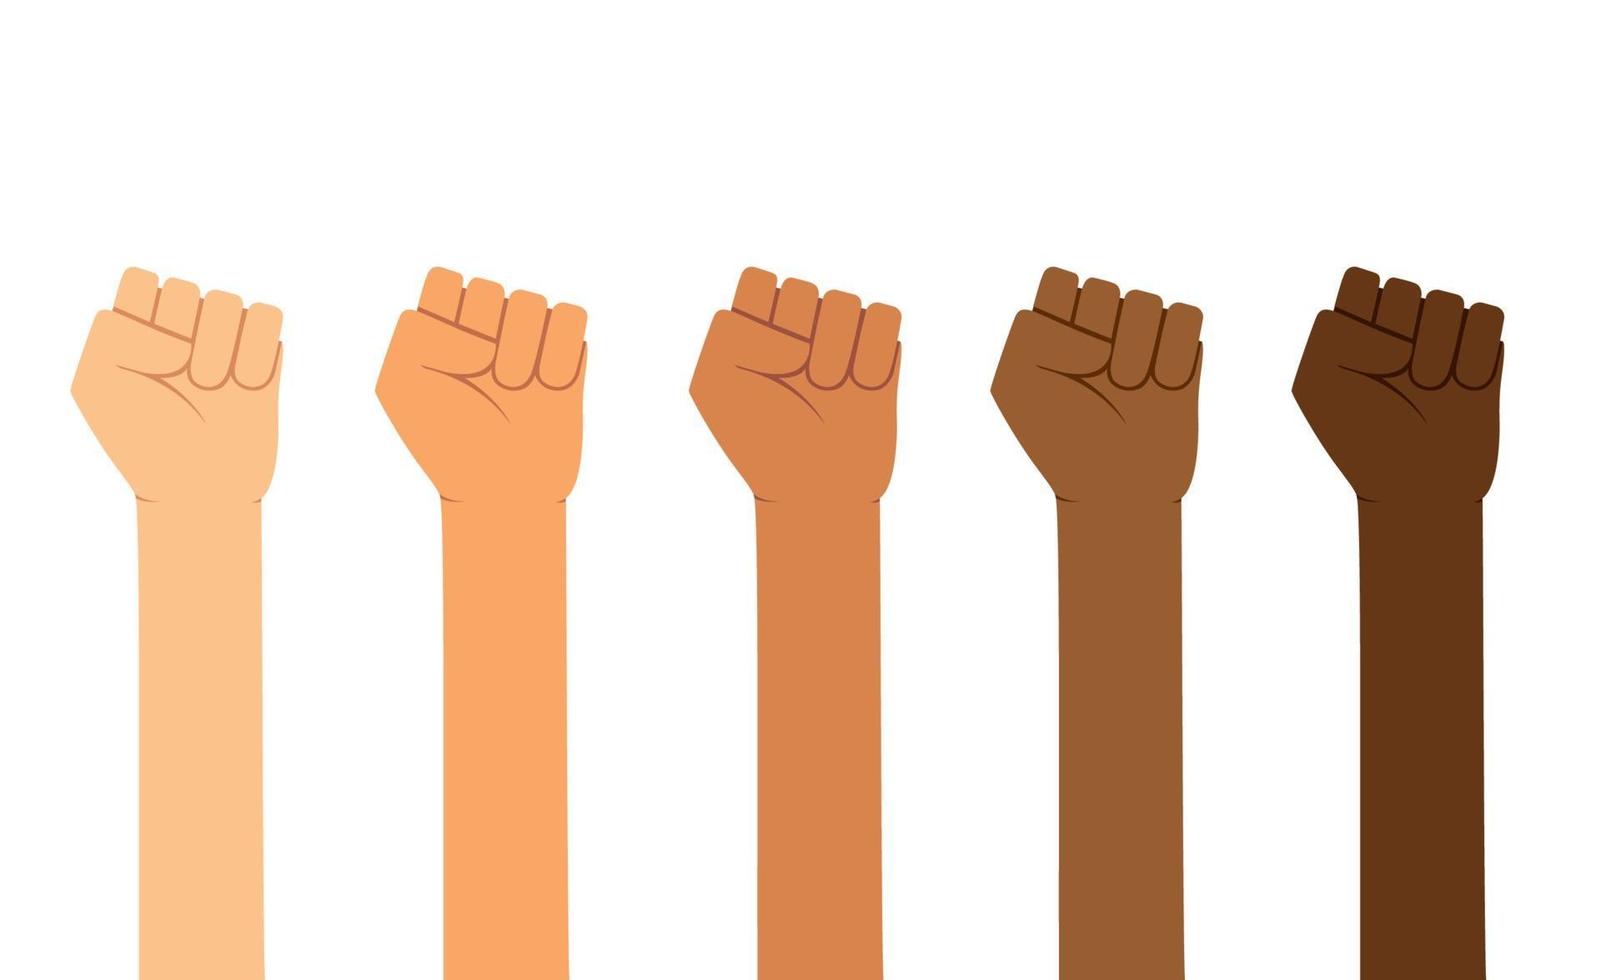 Different skin colors fist hands rise up. Empowering, Labor day, humans right, fight concept vector